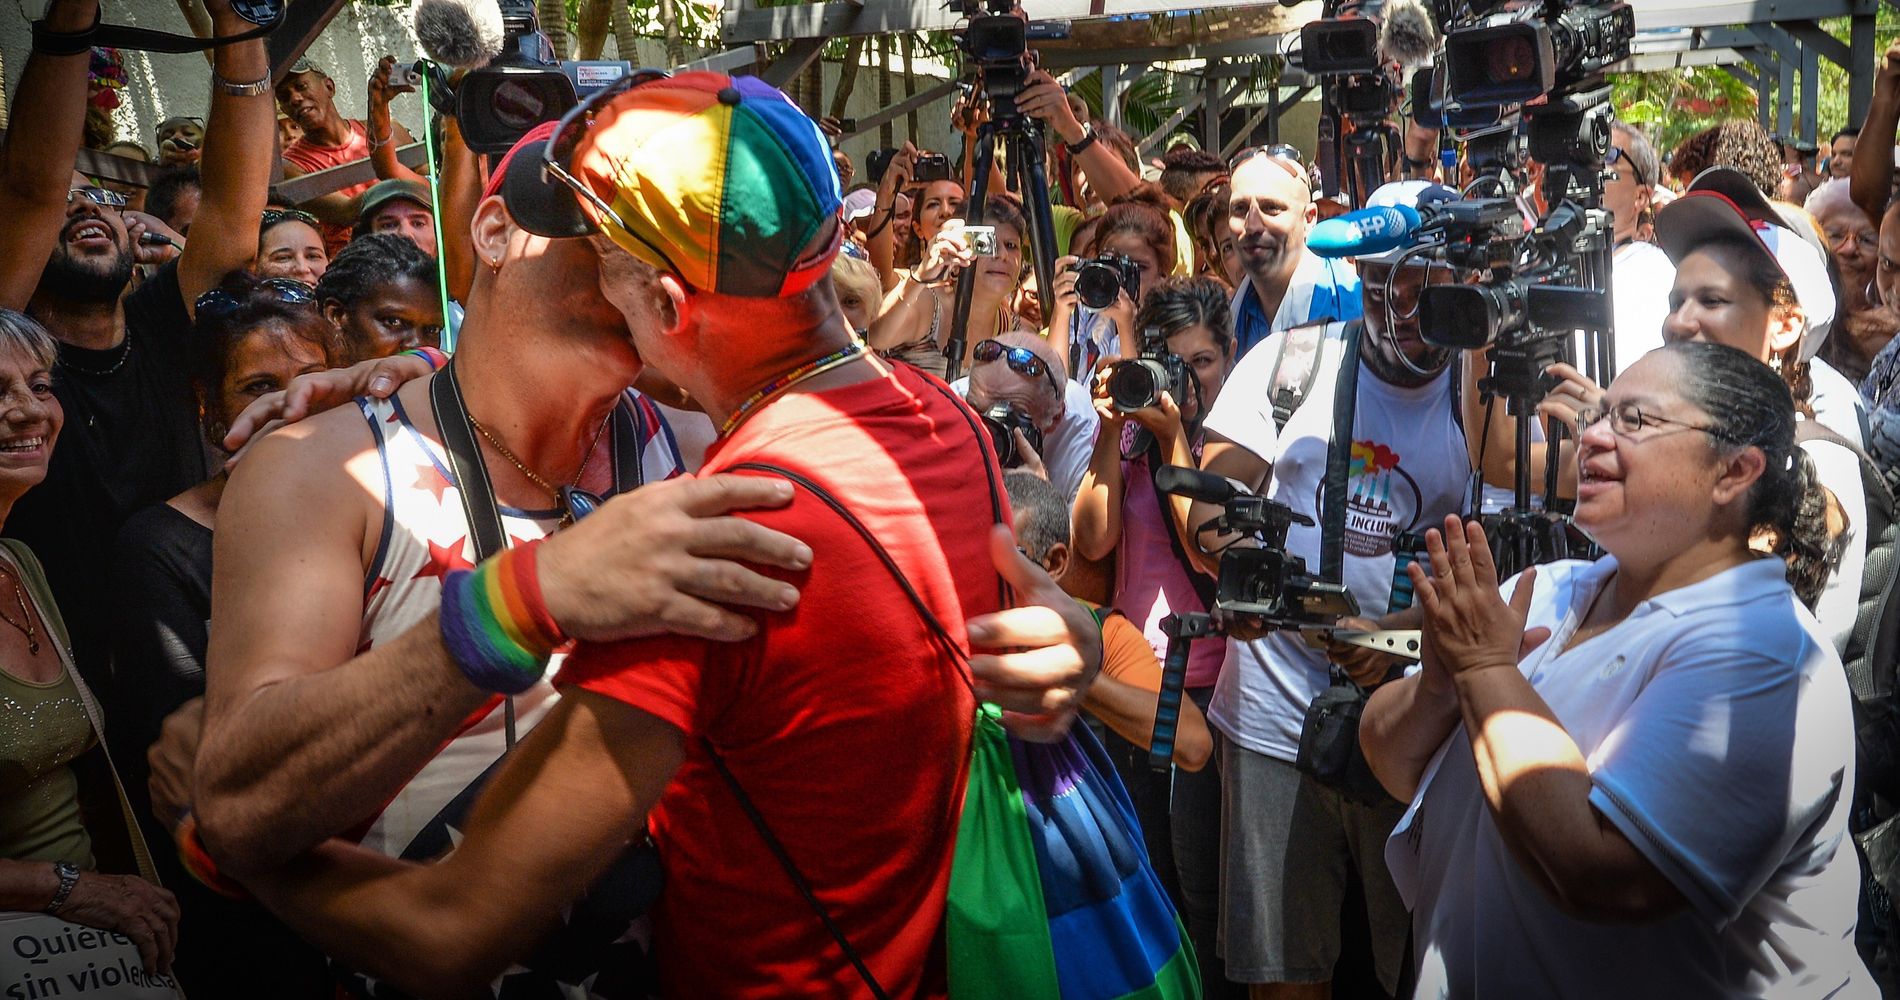 Here's How Cuba Is Fighting Homophobia...With Music | HuffPost